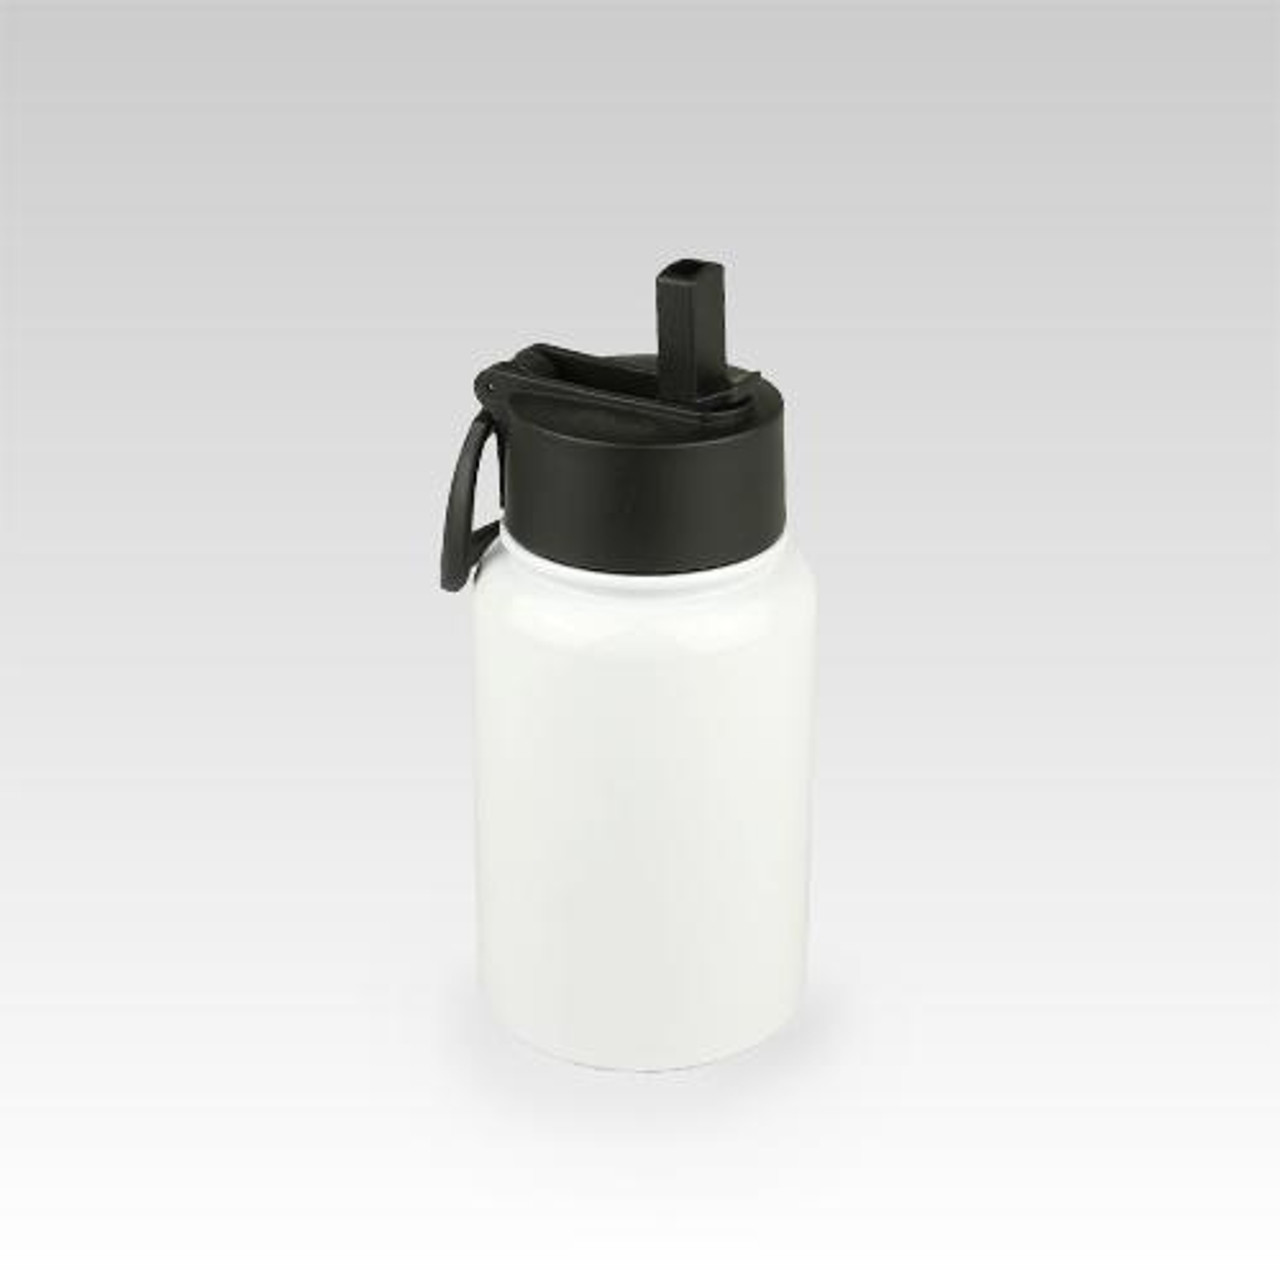 https://cdn11.bigcommerce.com/s-et4qthkygq/images/stencil/1280x1280/products/10183/34984/walablanks-water-bottle-with-wide-mouth-straw-and-lid-17-oz__99673.1666287353.jpg?c=2